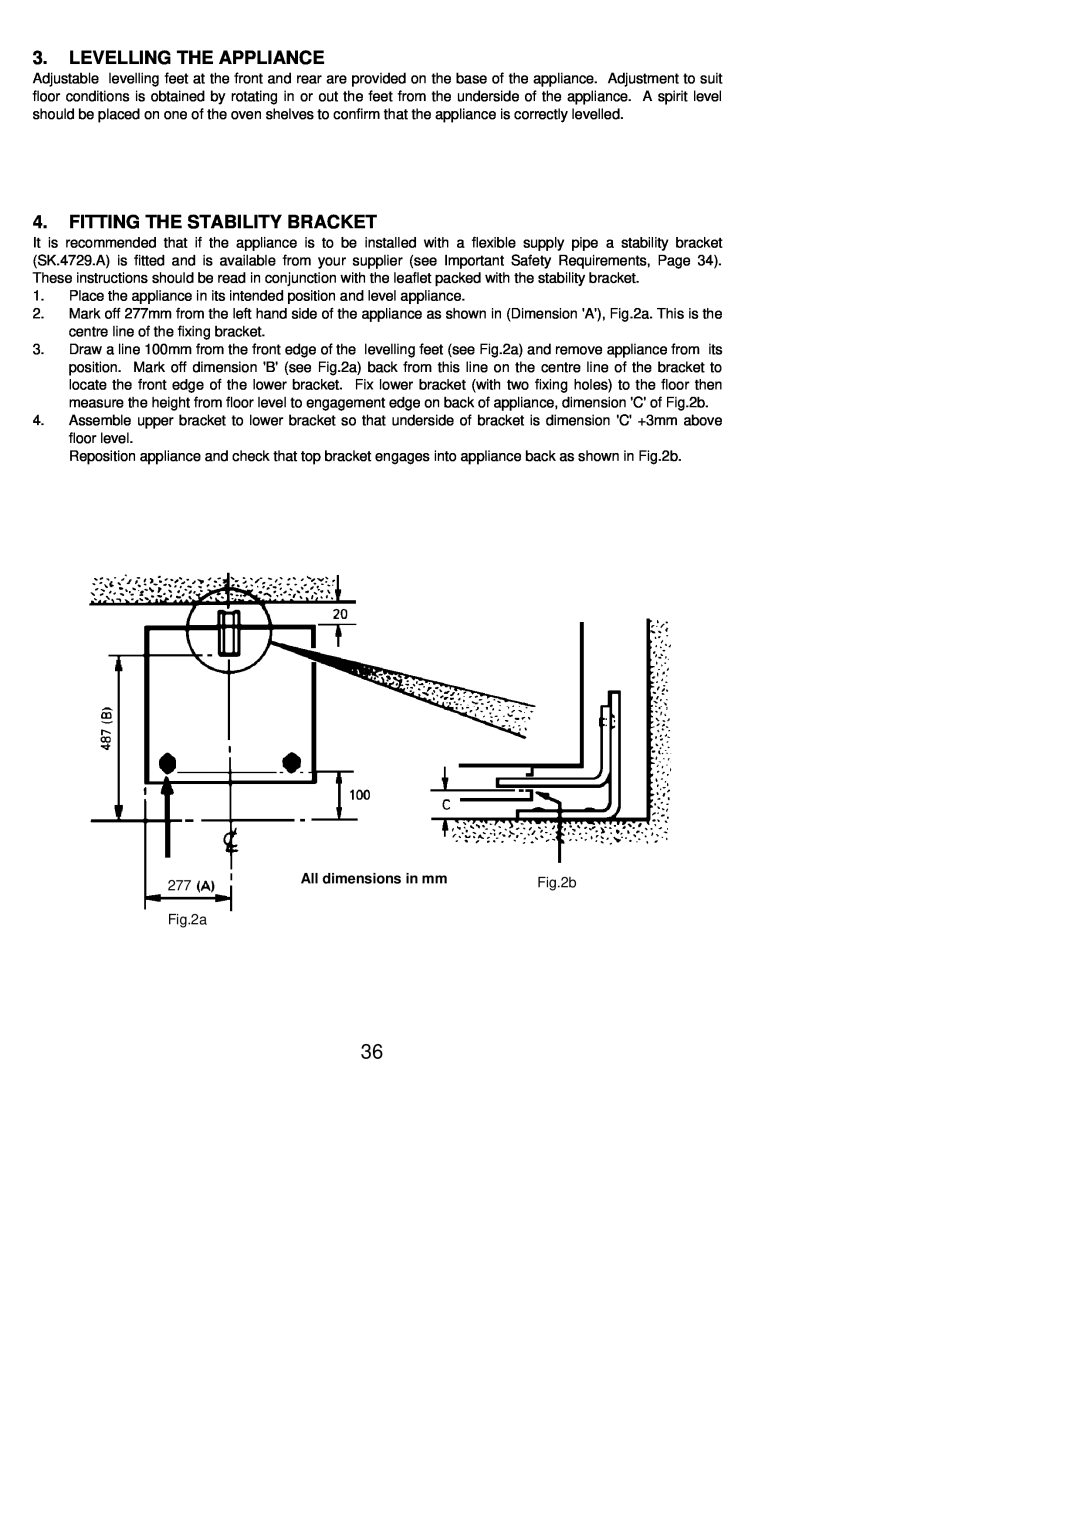 Electrolux 55V installation instructions Levelling The Appliance, Fitting The Stability Bracket, All dimensions in mm 